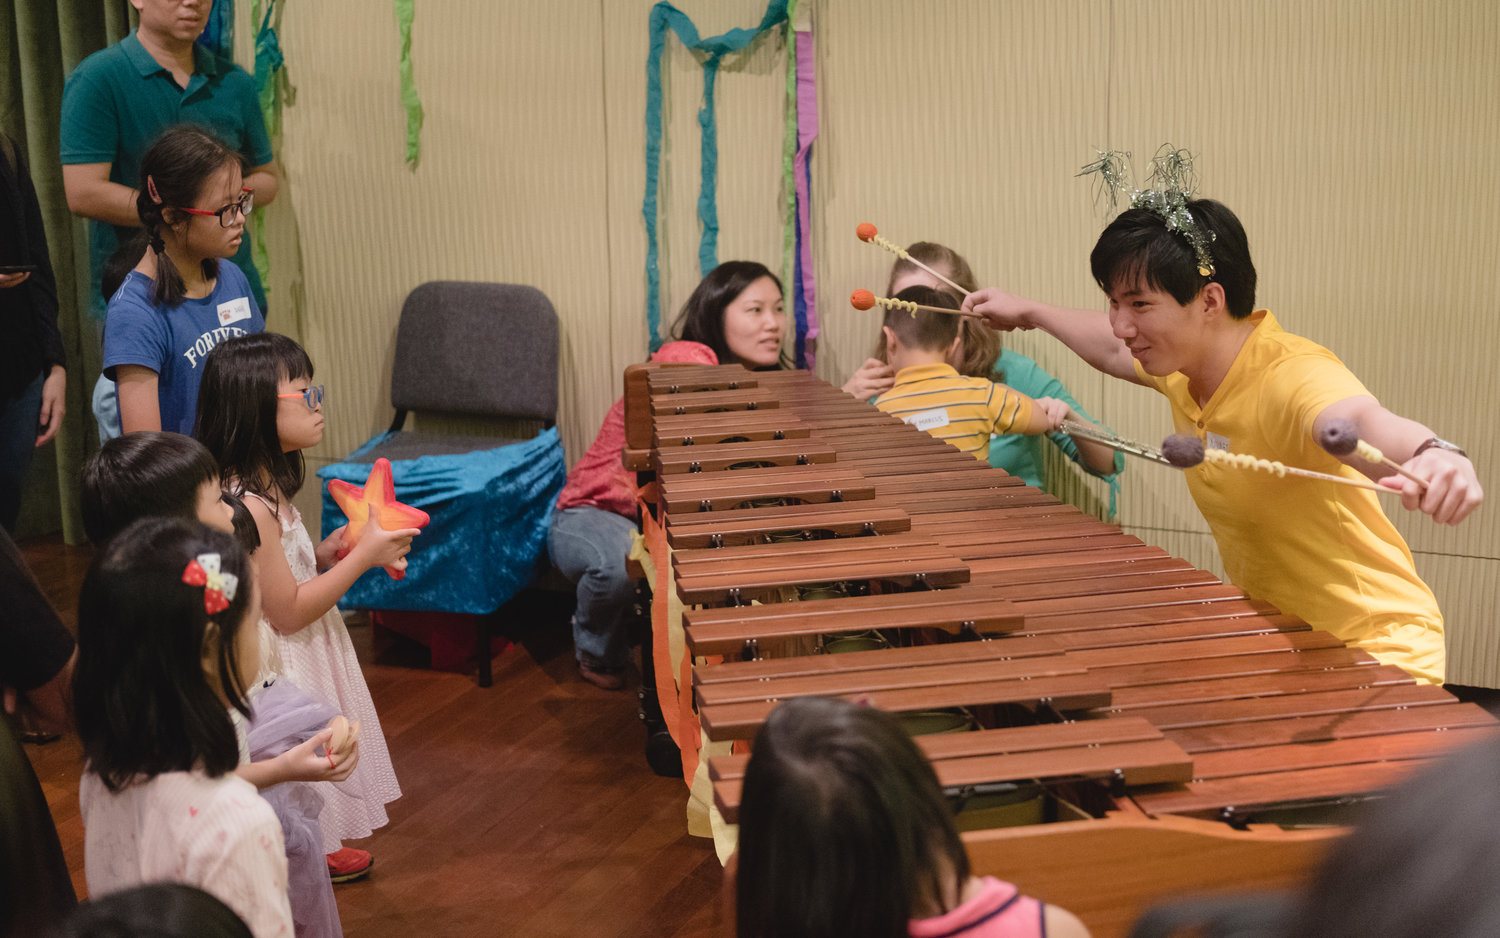 Participants were led through an underwater adventure, making friends with sea creature characters who each had an associated musical instrument, played by our students.